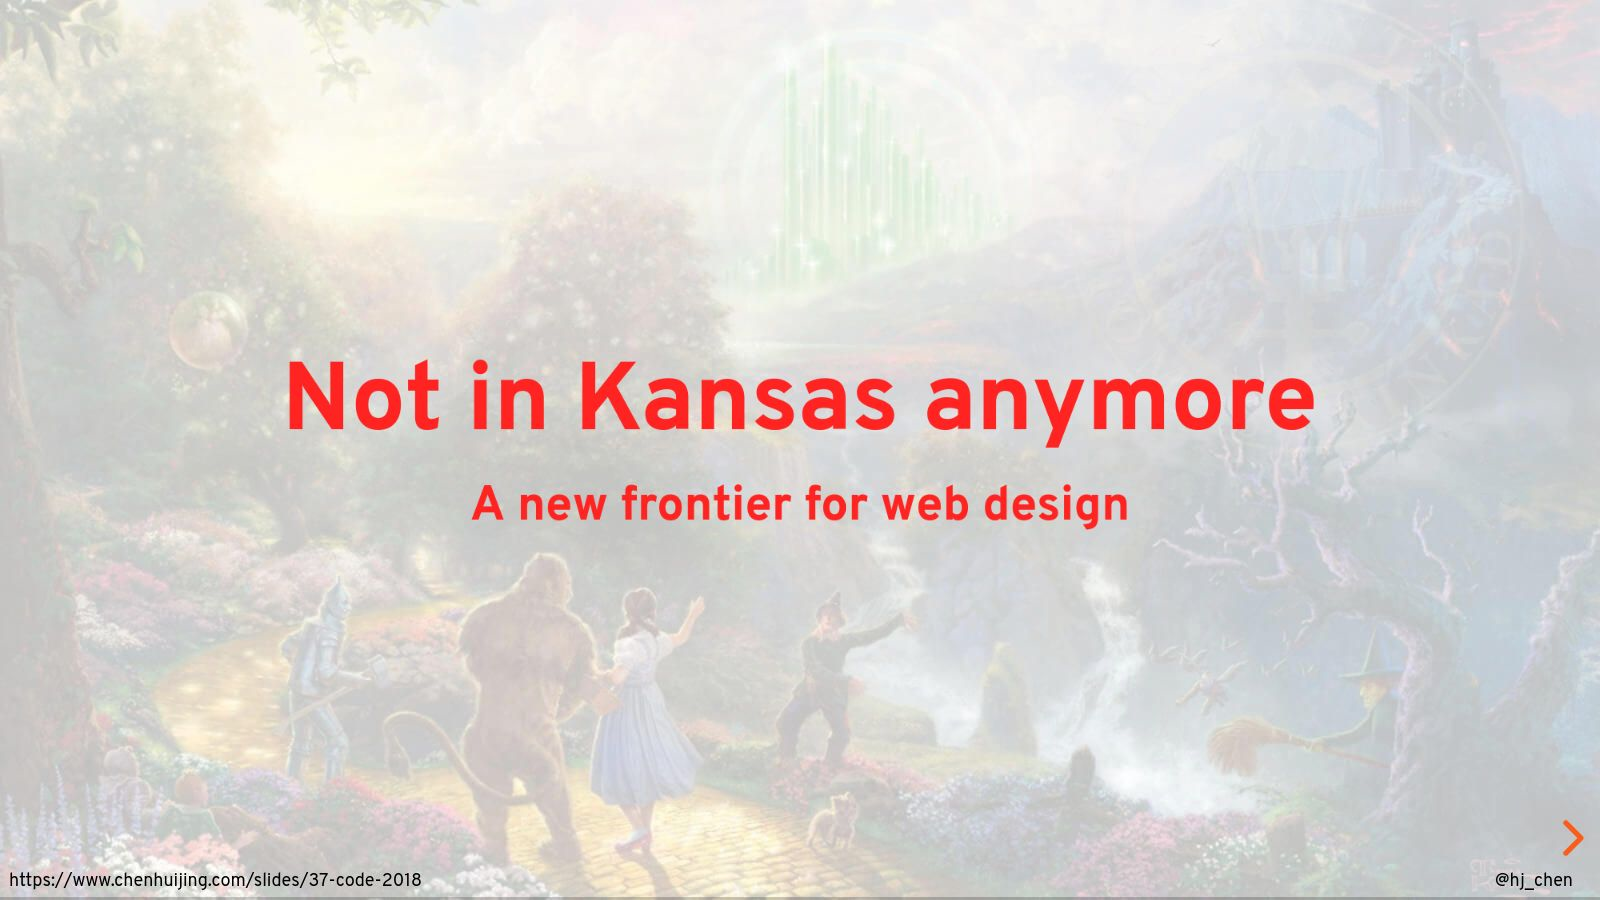 Not in Kansas anymore: a new frontier for web deisgn